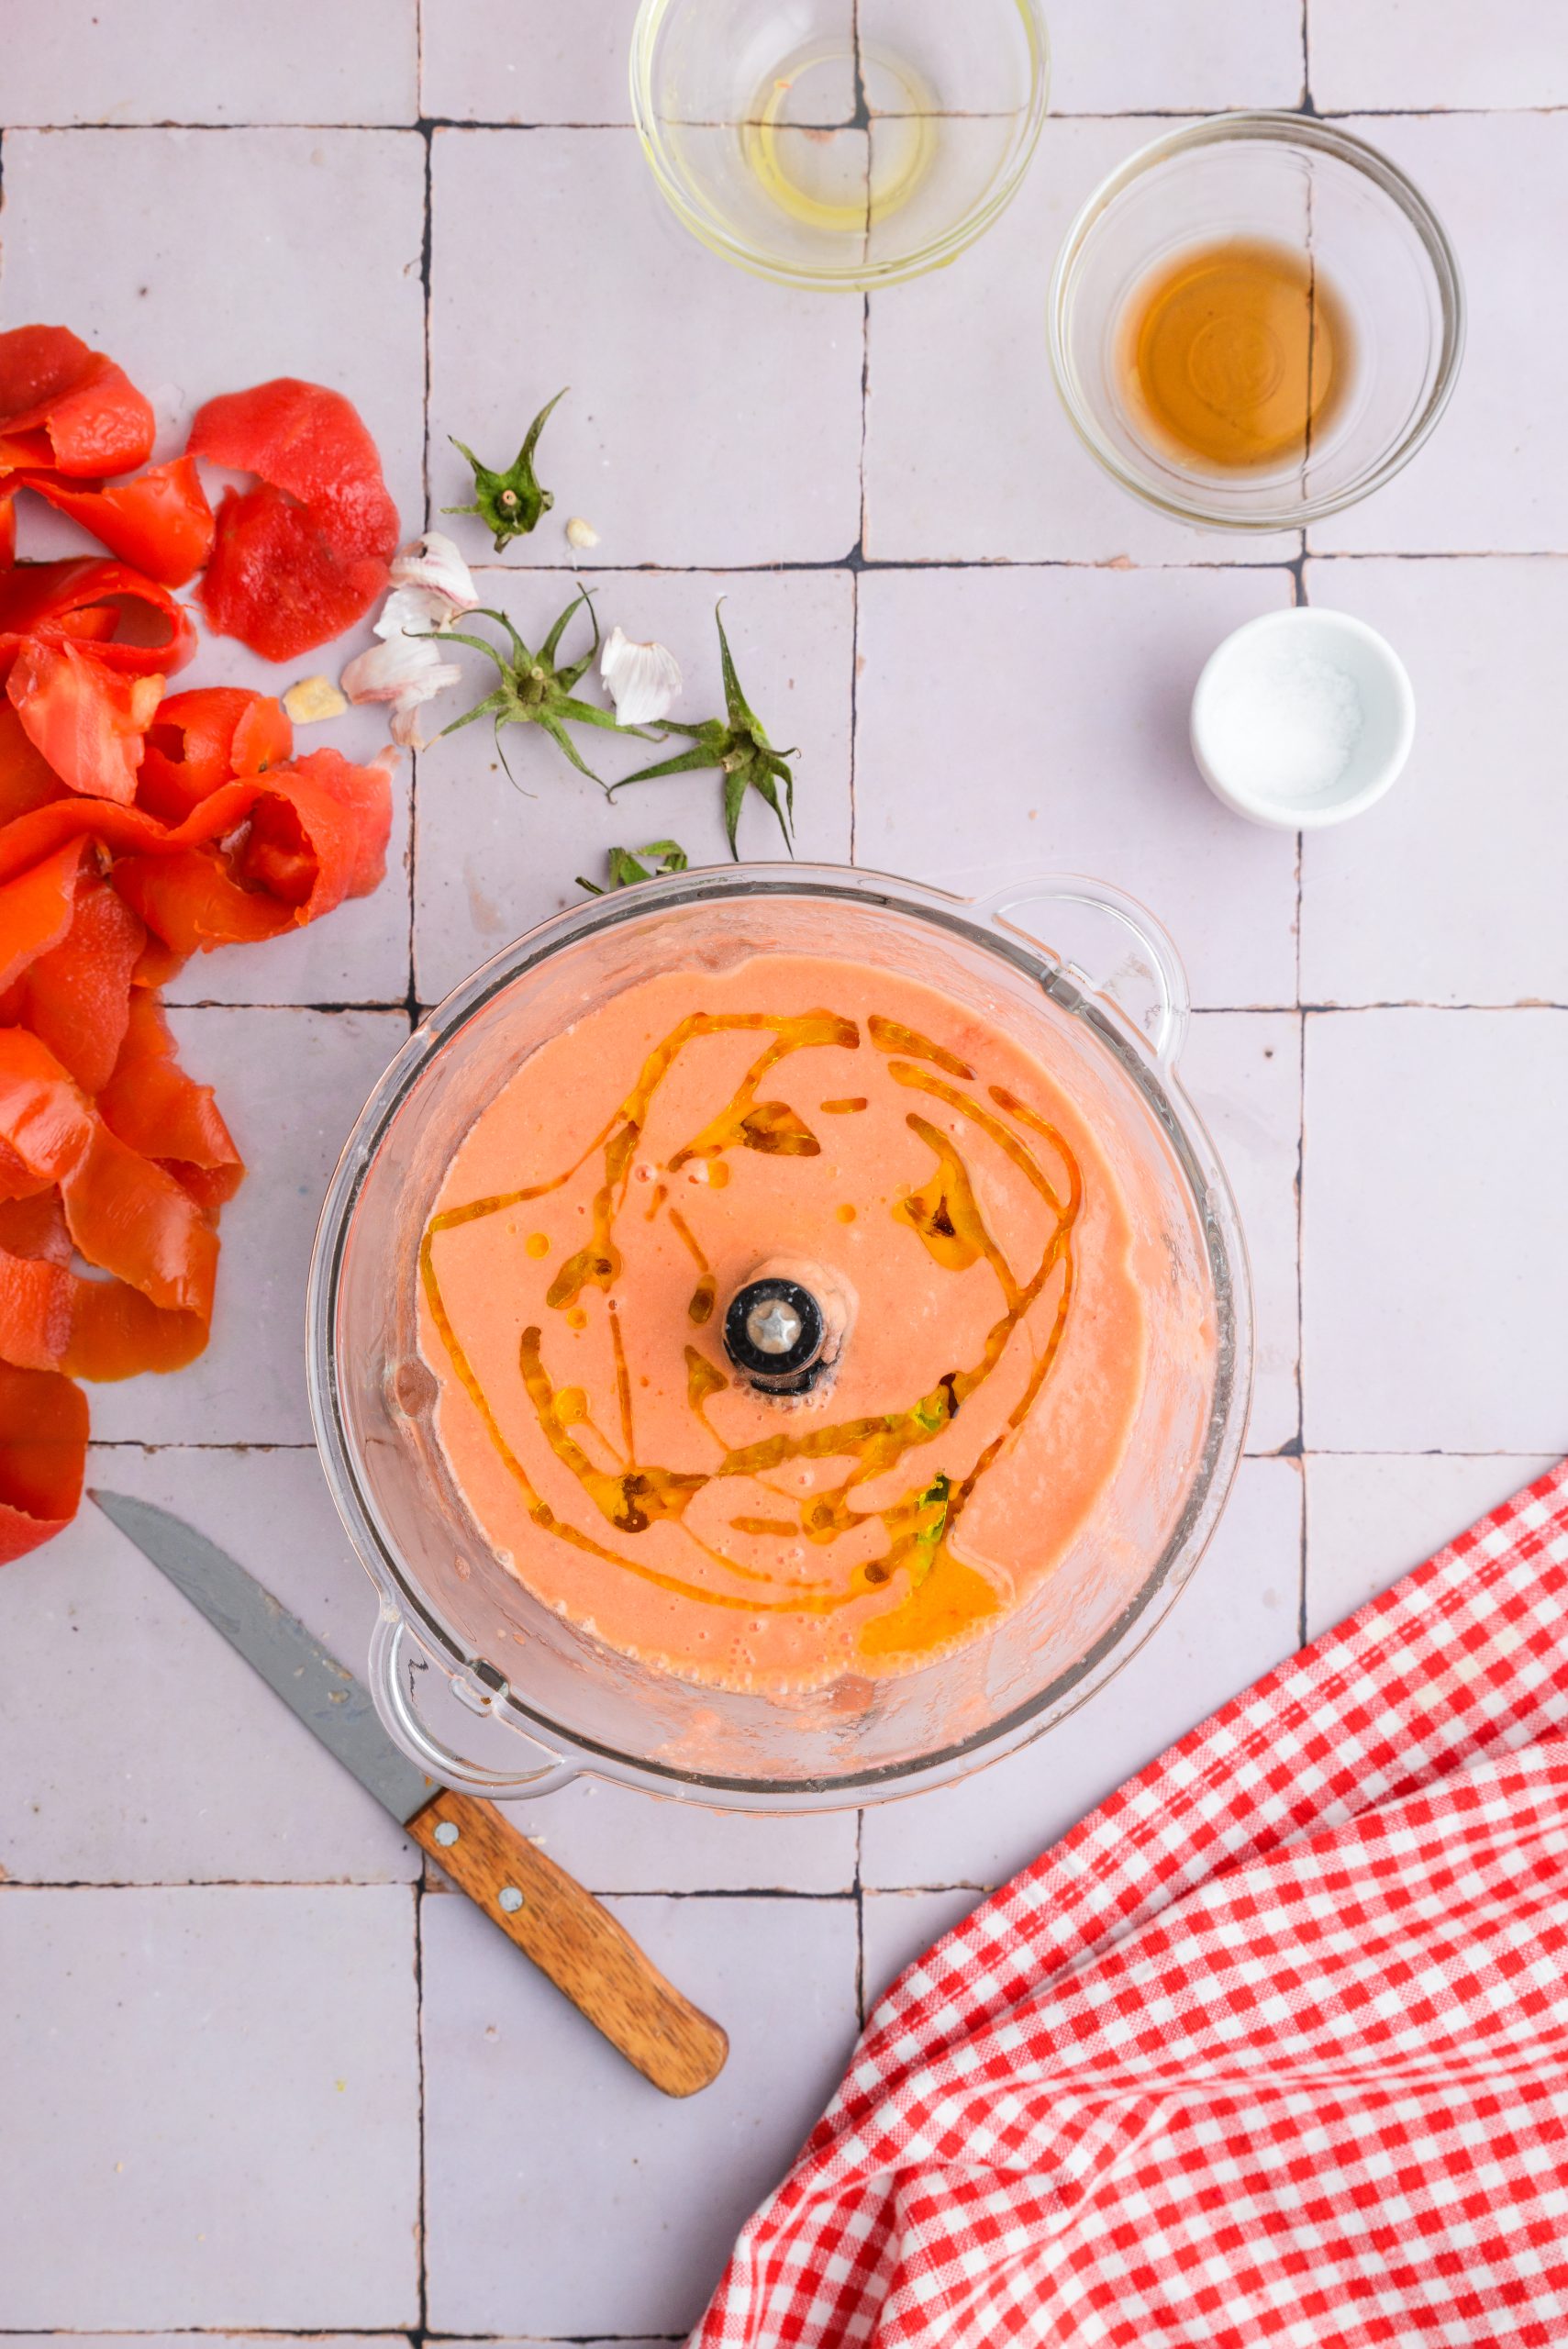 Salmorejo recipe: Slowly pour the olive oil into the running blender to emulsify the oil.